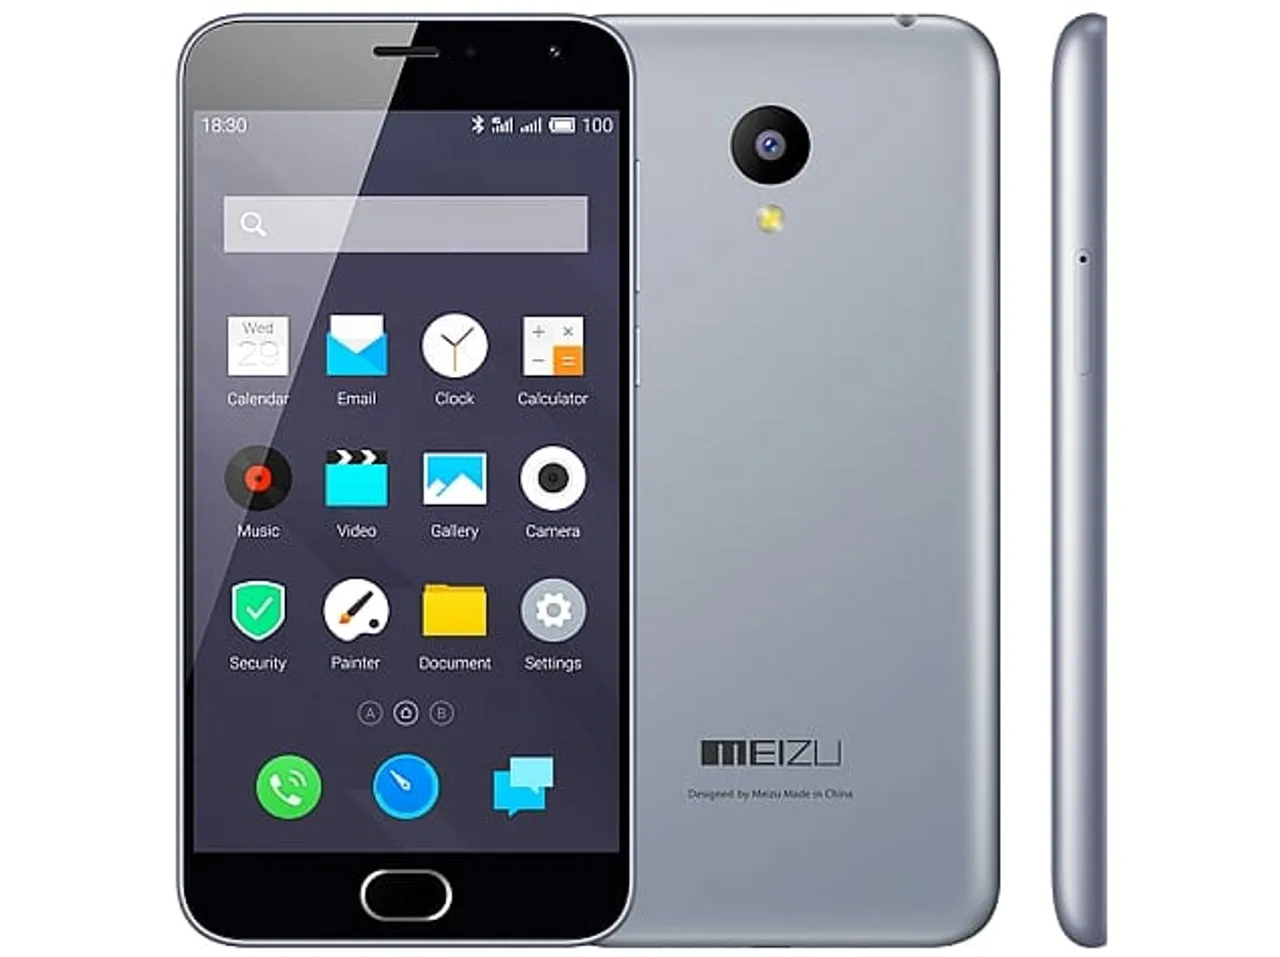 Diwali comes early for Meizu fans  Bring home the Meizu m2 for INR 6,999 and get a 32 GB Micro SD card free